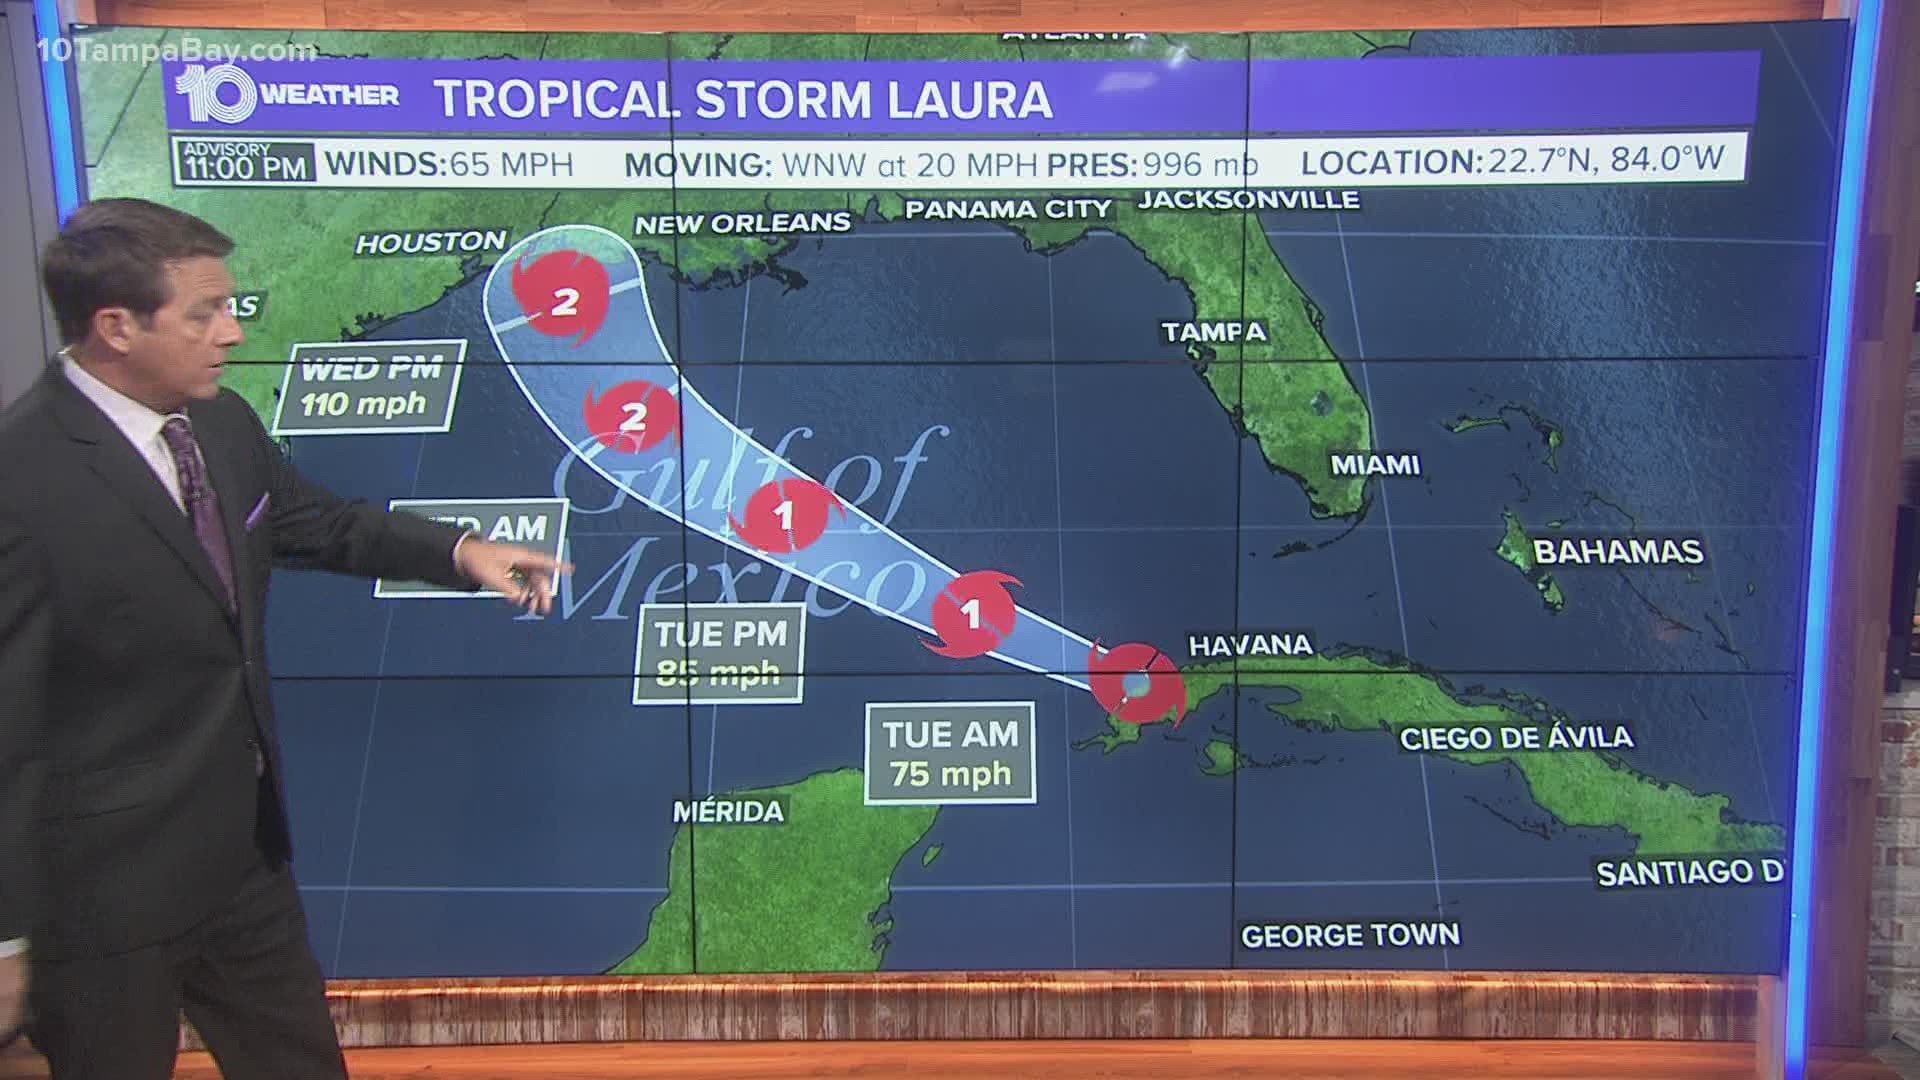 It's possible Laura could undergo a period of rapid intensification as it moves across the Gulf of Mexico.